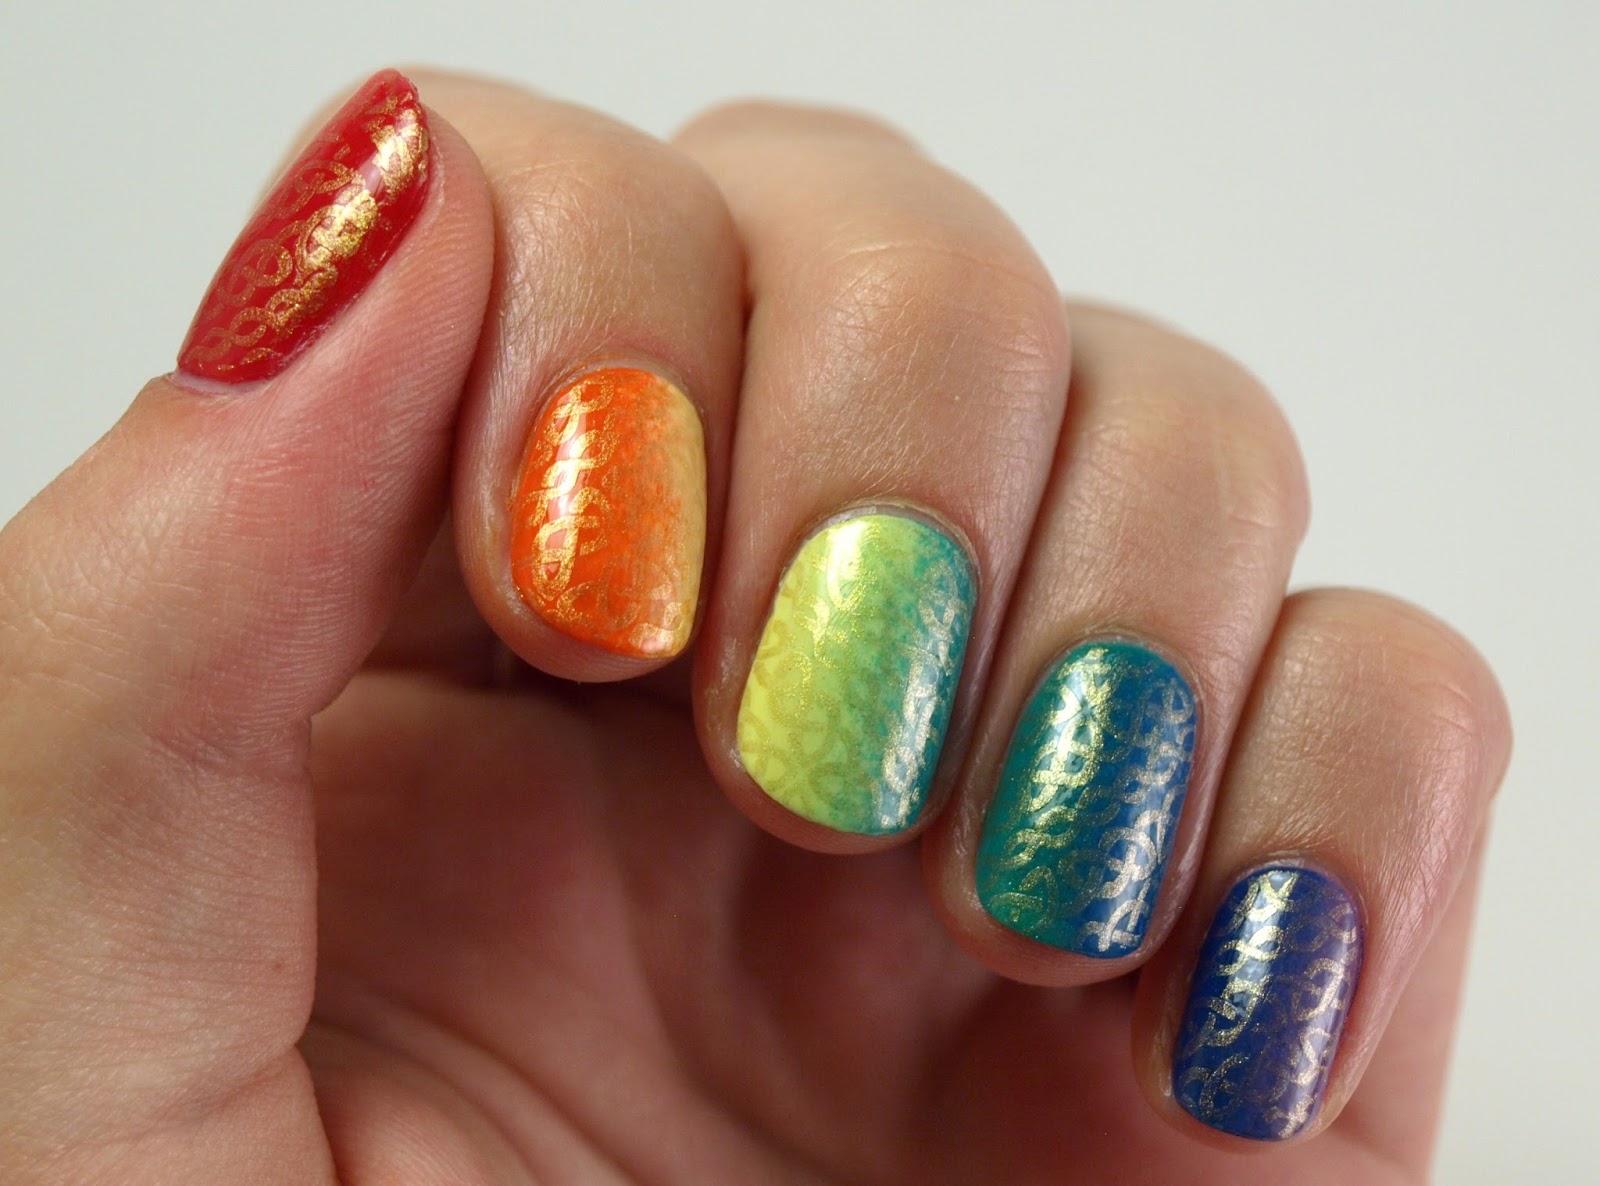 1. Rainbow Nails - wide 8